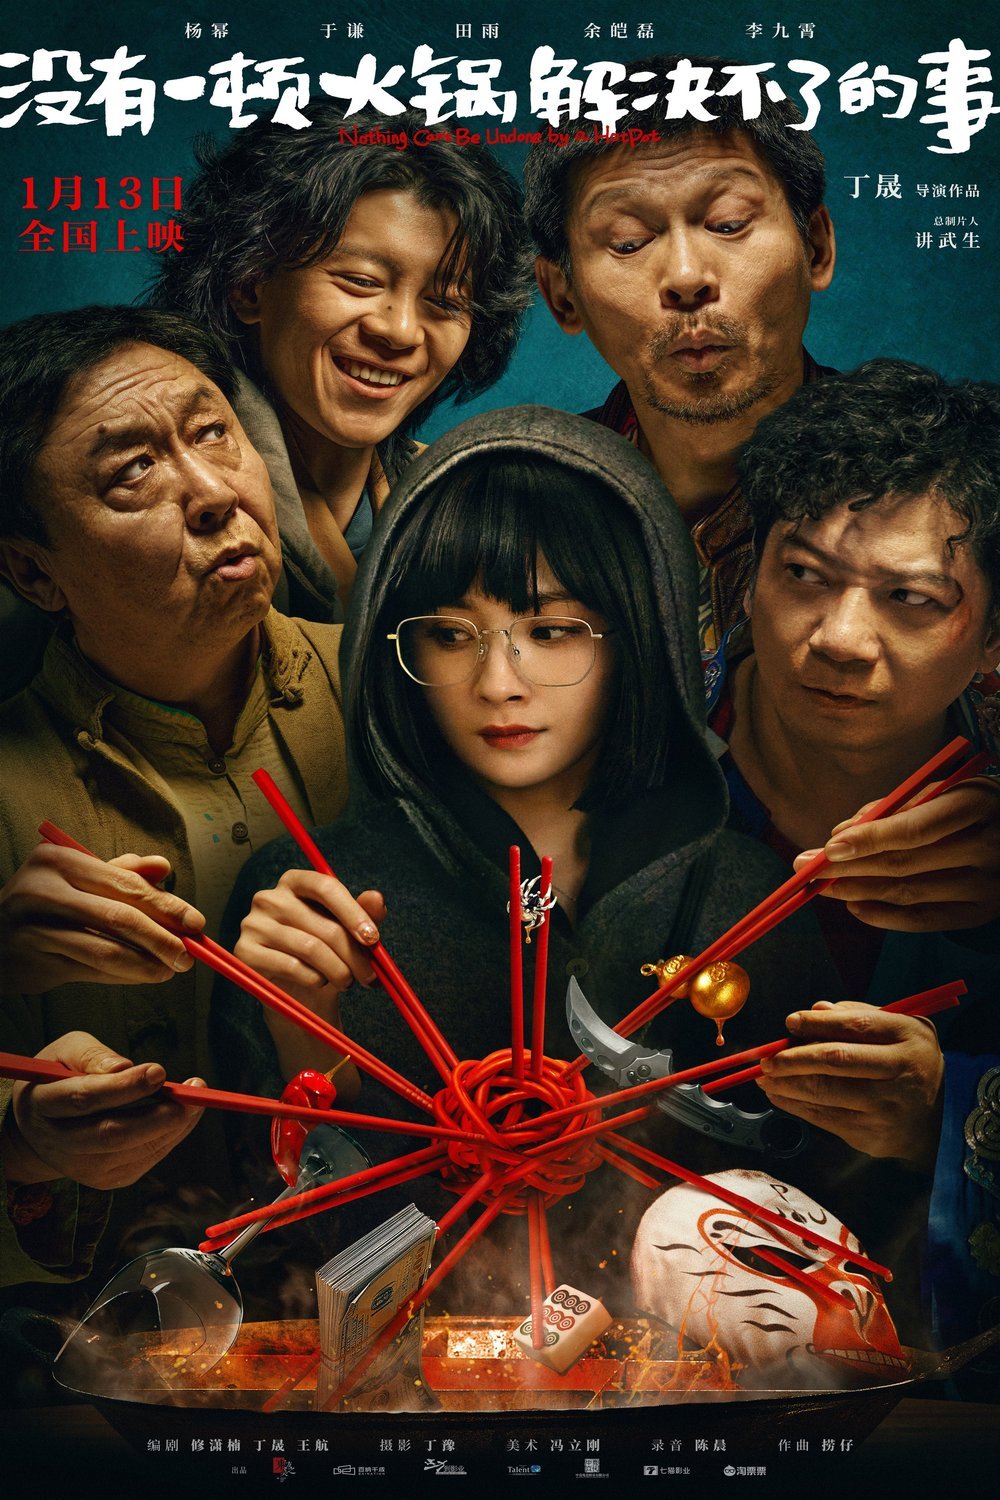 Mandarin poster of the movie Nothing Can't Be Undone by a HotPot